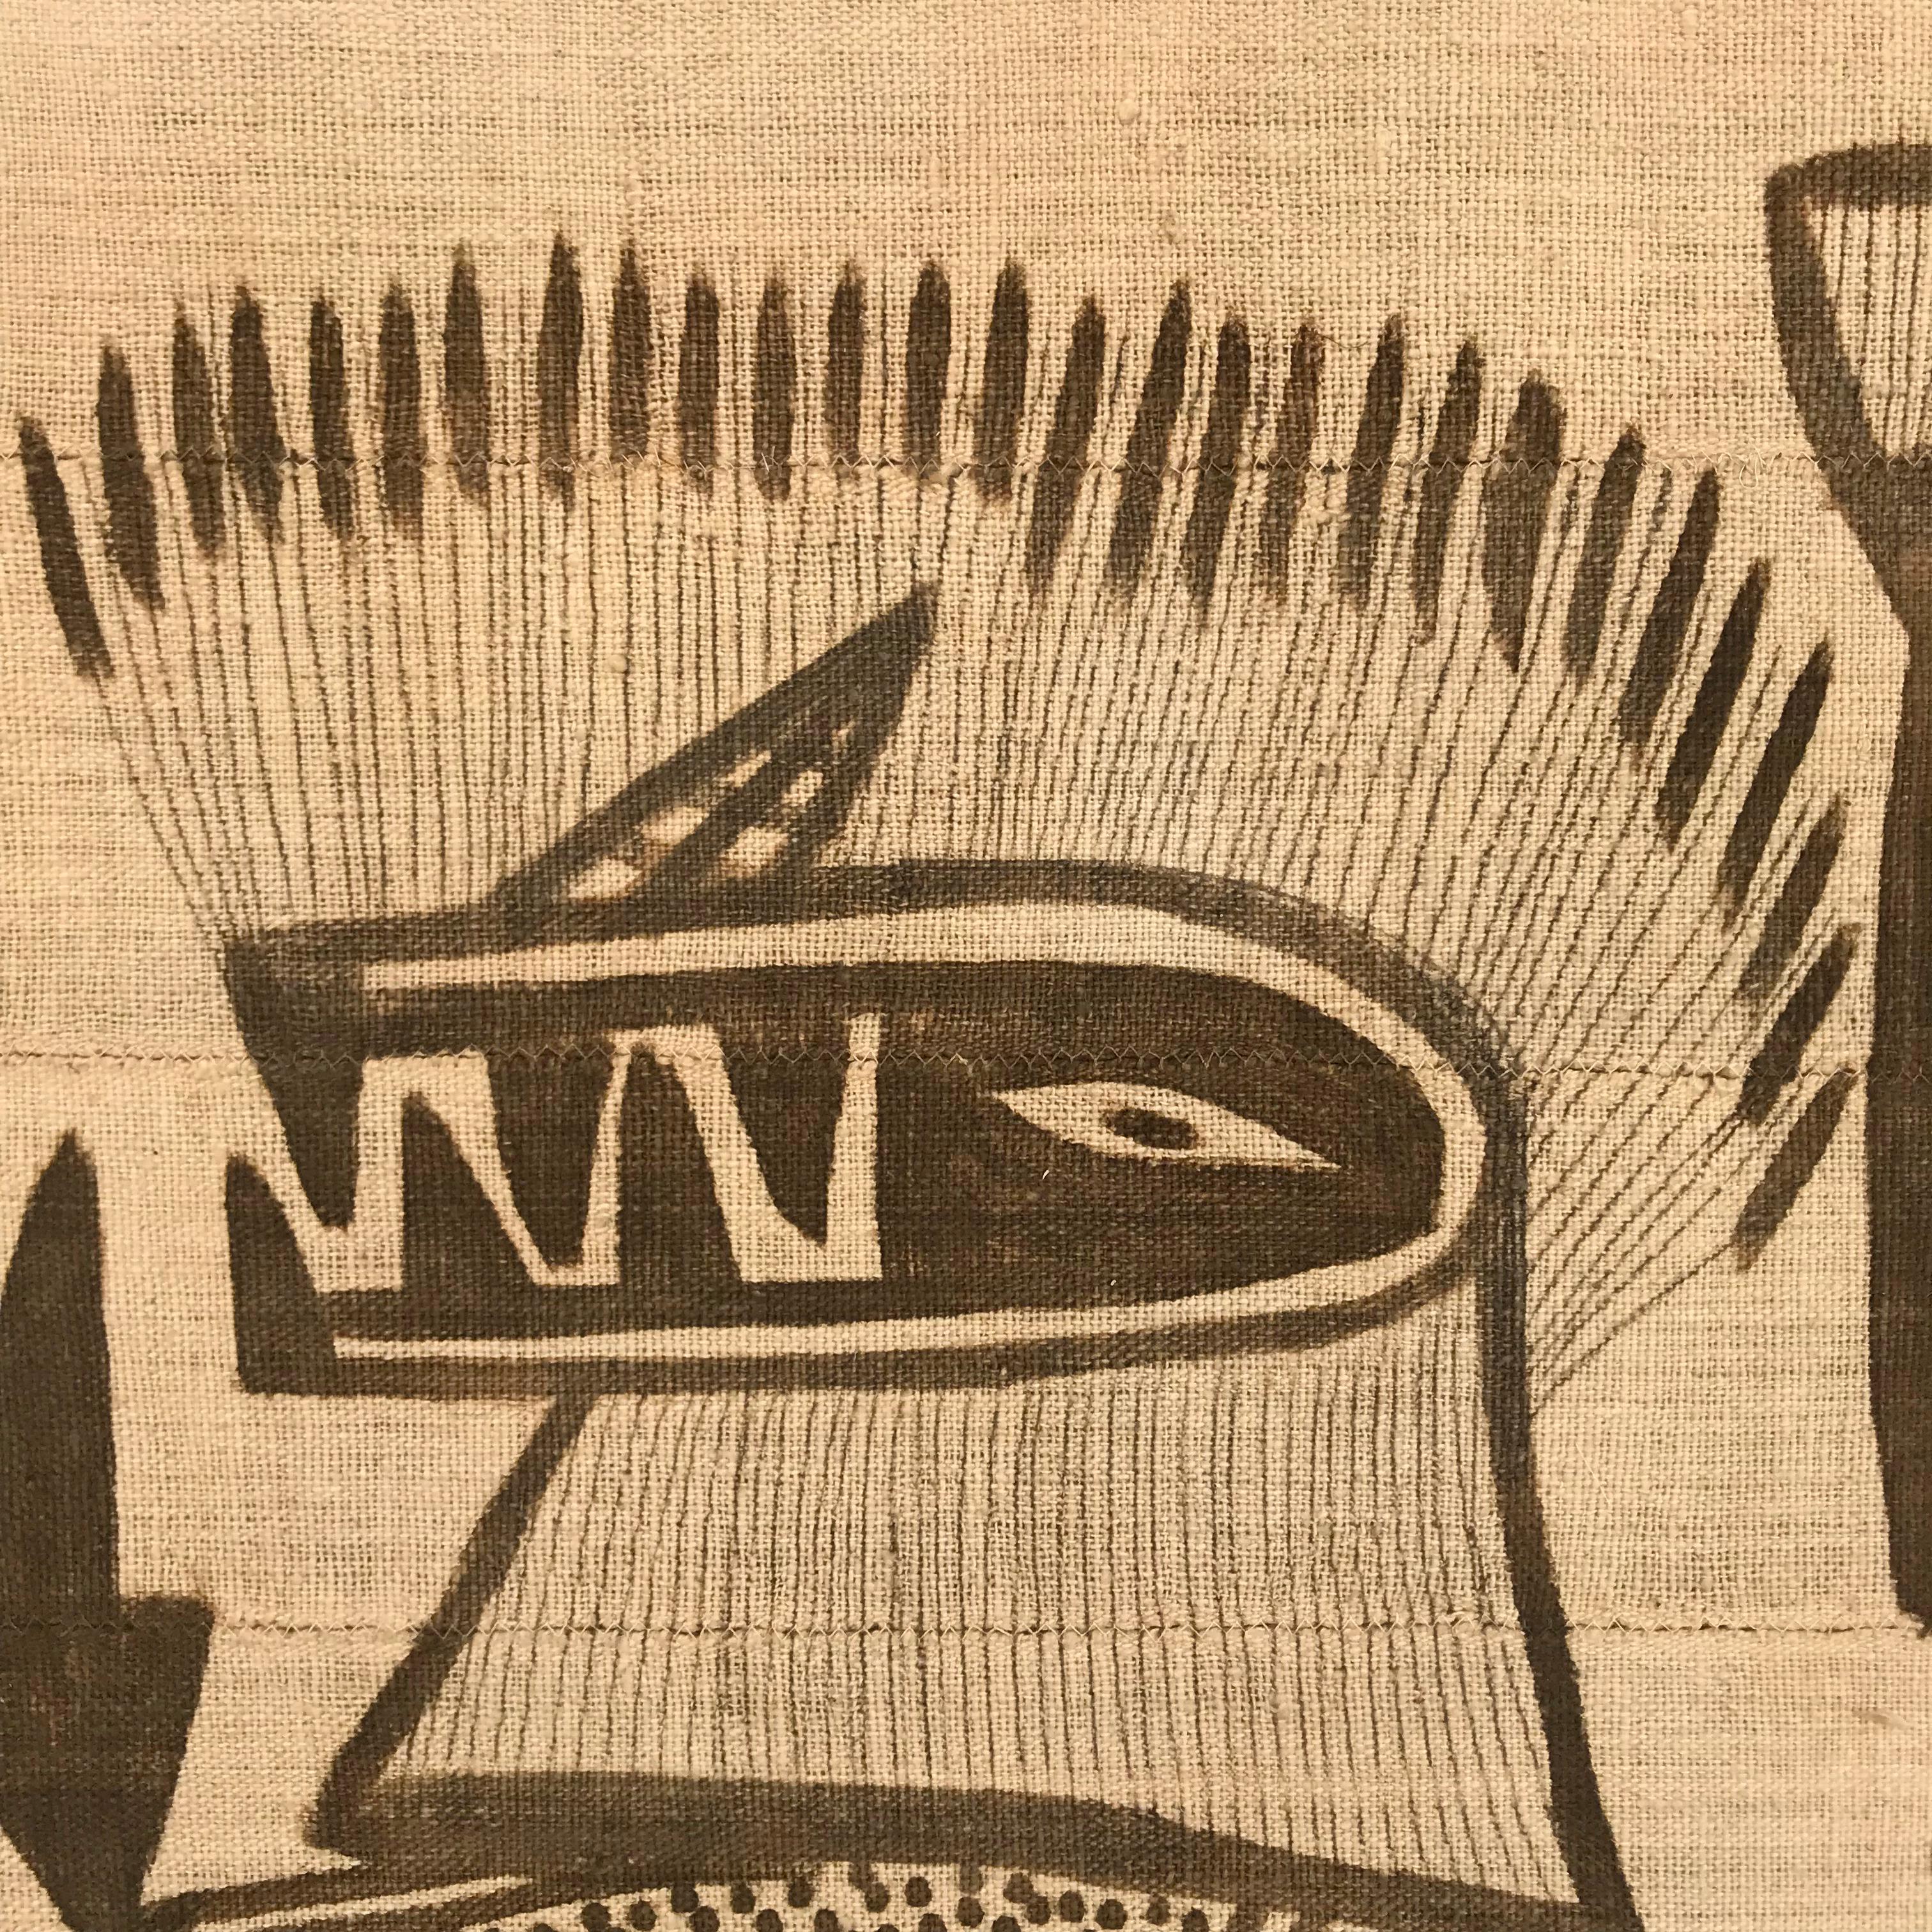 A bold mid-20th century Ivorian Senufo mounted hand-woven cotton Korhogo cloth depicting several figures, some in costume, dancing, amidst a field of birds, deer, and fish. Korhogo cloths are woven of cotton in narrow strips, stitched together, and